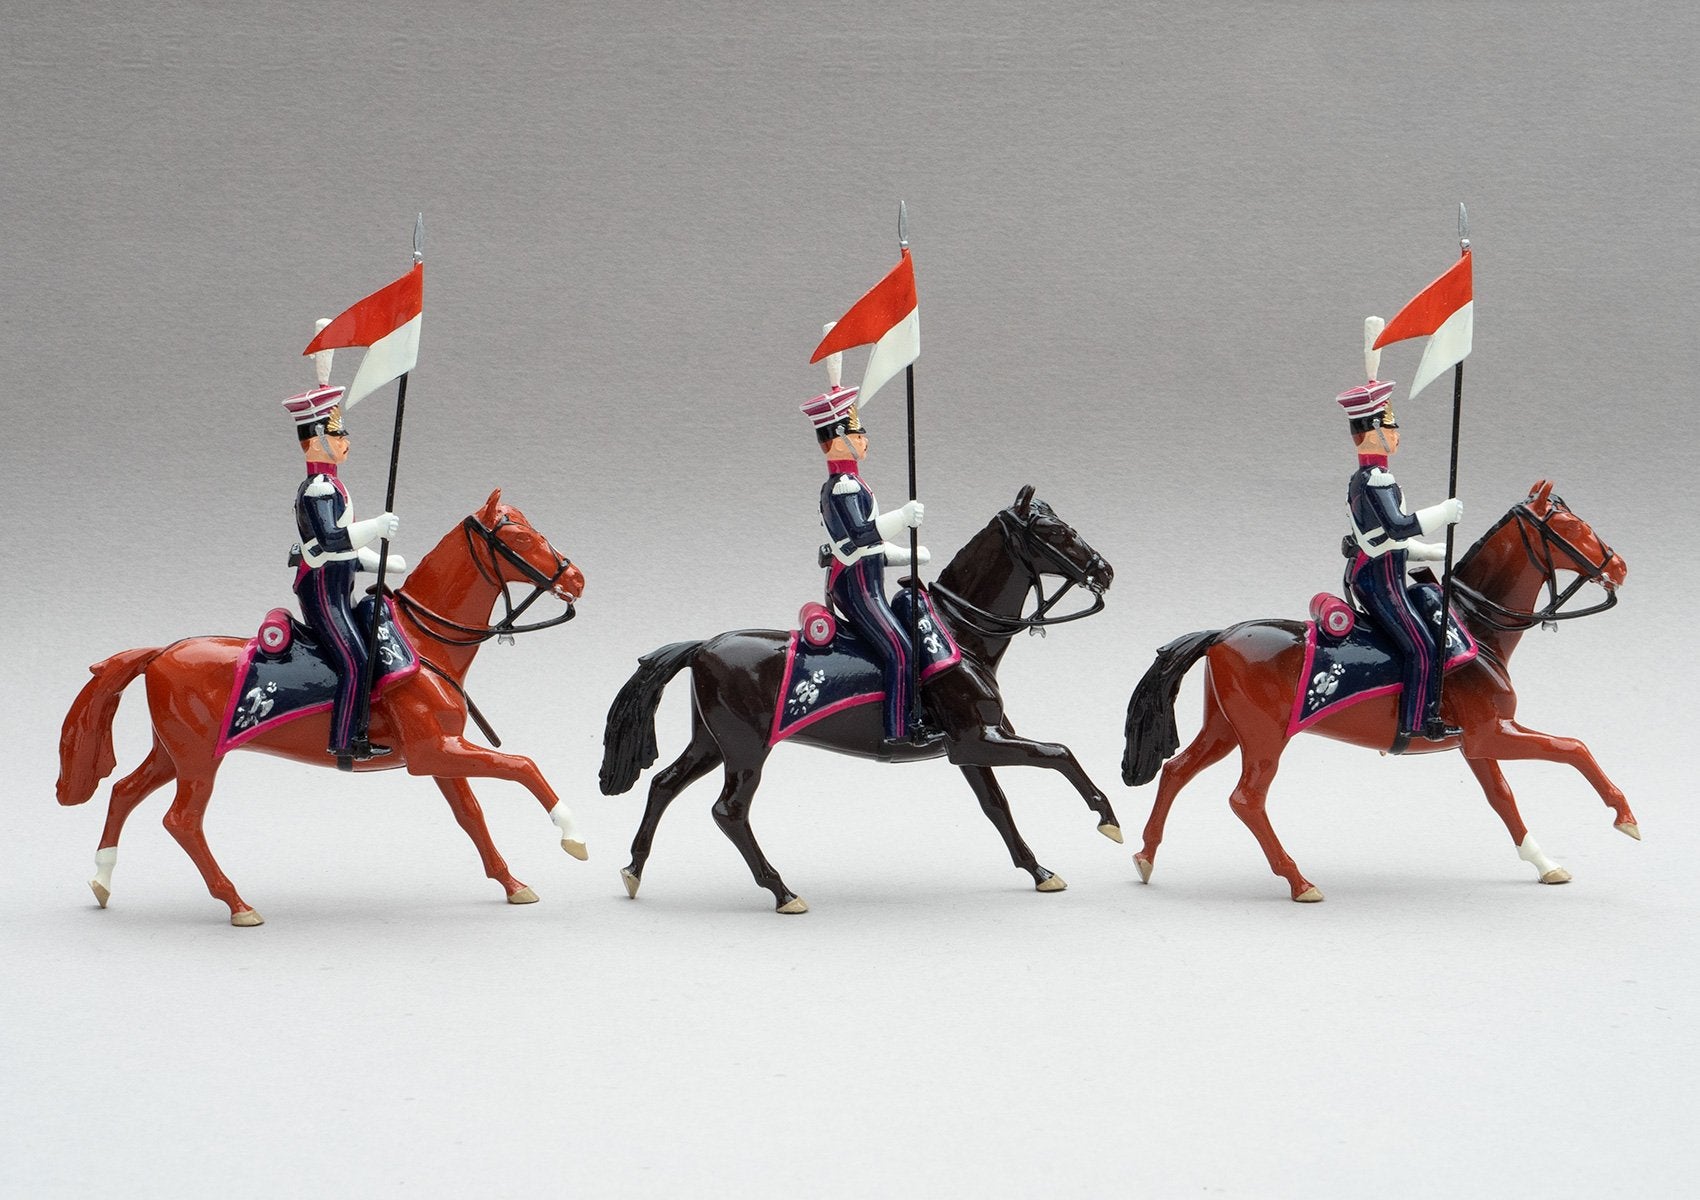 Set 102 Polish Lancers | Cavalry | Napoleonic Wars | Three light horses with mounted lancers | Waterloo | © Imperial Productions | Sculpt by David Cowe